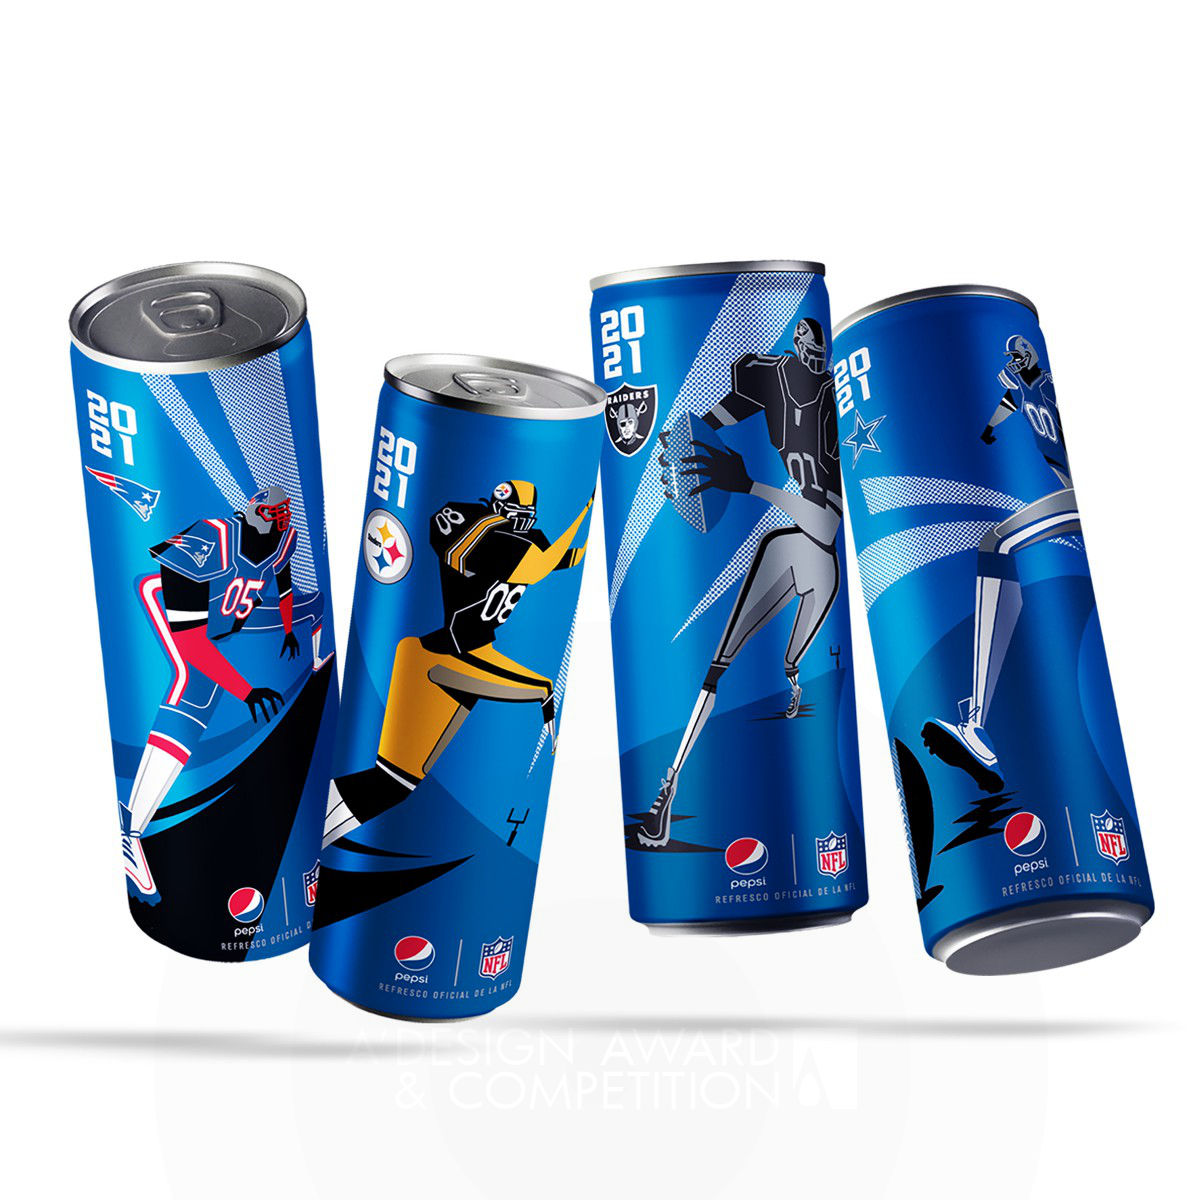 Dennis Furniss wins Platinum at the prestigious A' Packaging Design Award with Pepsi NFL Limited Edition Packaging.